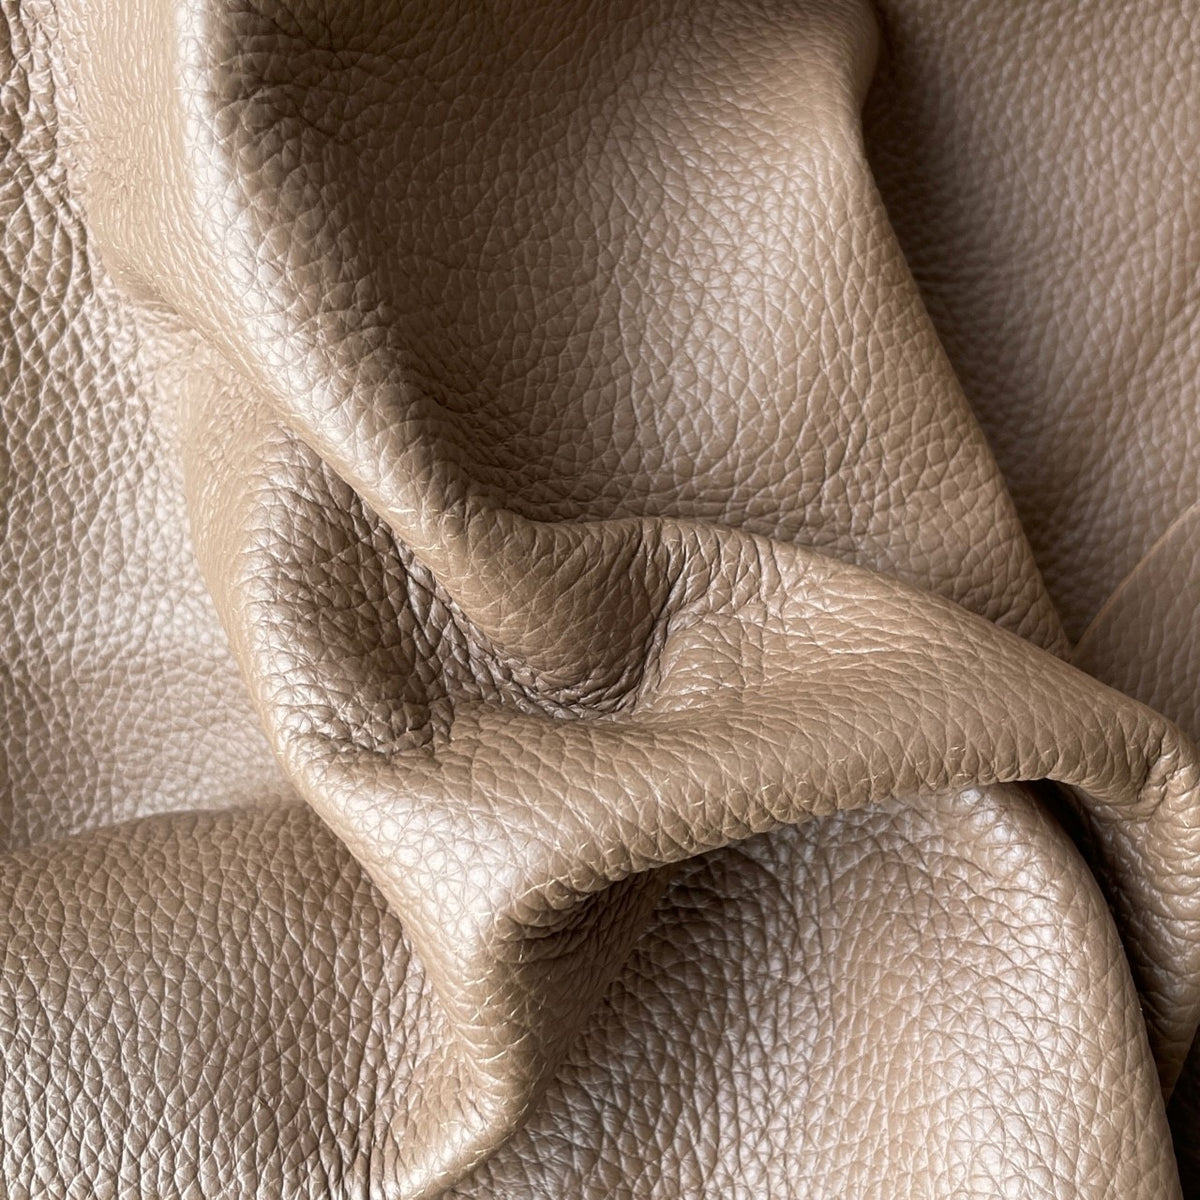 Upholstery Cow Hide #36 | Light Brown | 1.1 mm | 4.77, 3.83, 4.11 sq.m | $355 ea.